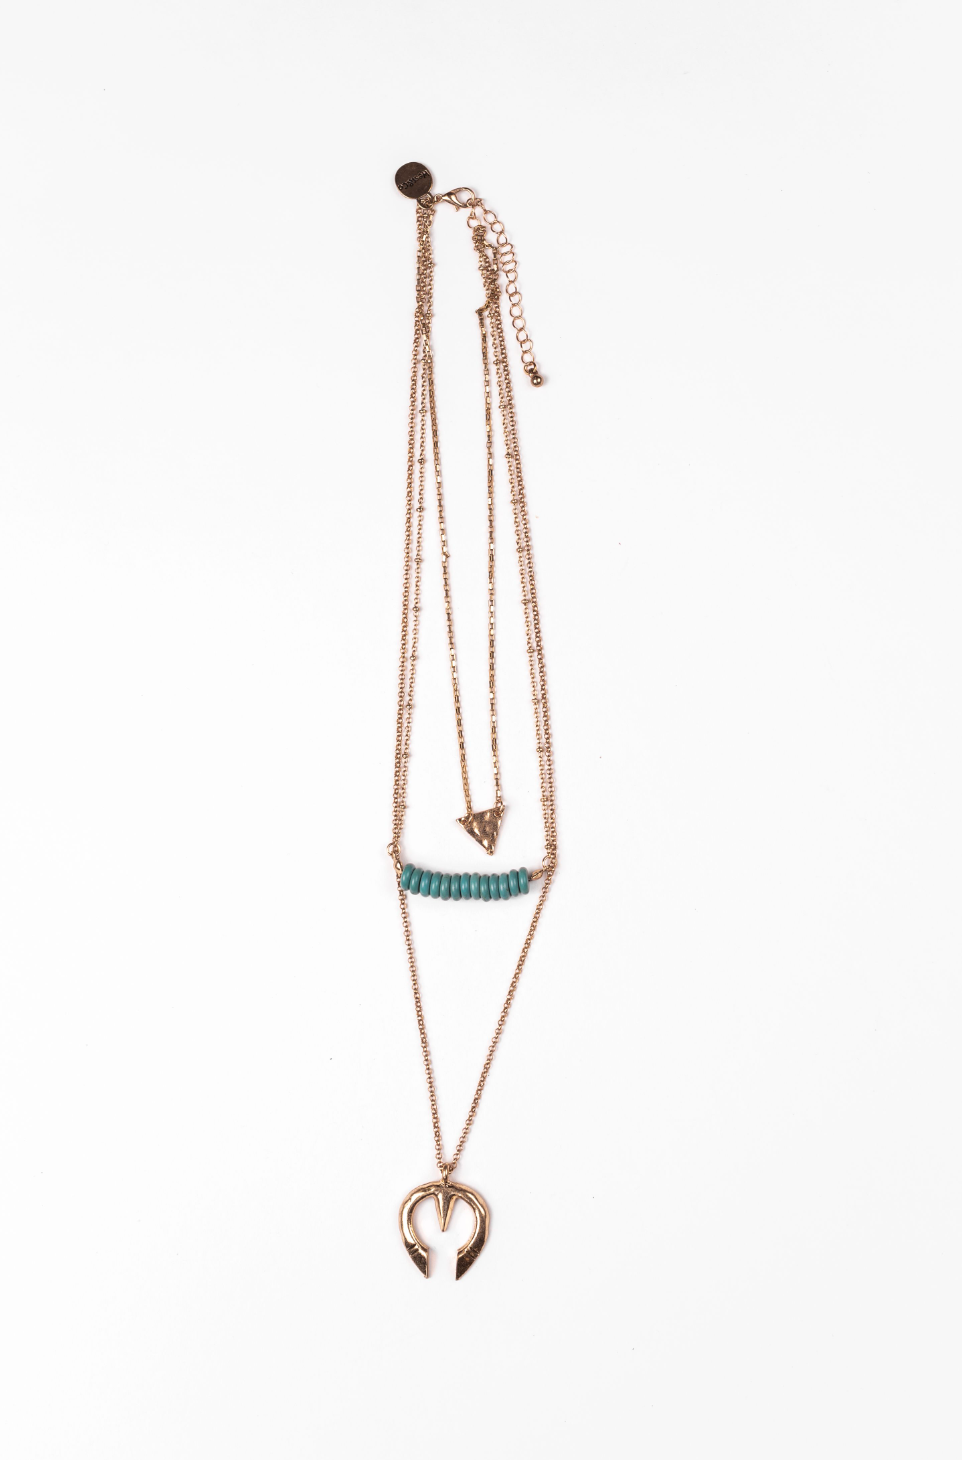 Burnished Gold 3 Tier Necklace with Triangle, Turq Bead, & Naja